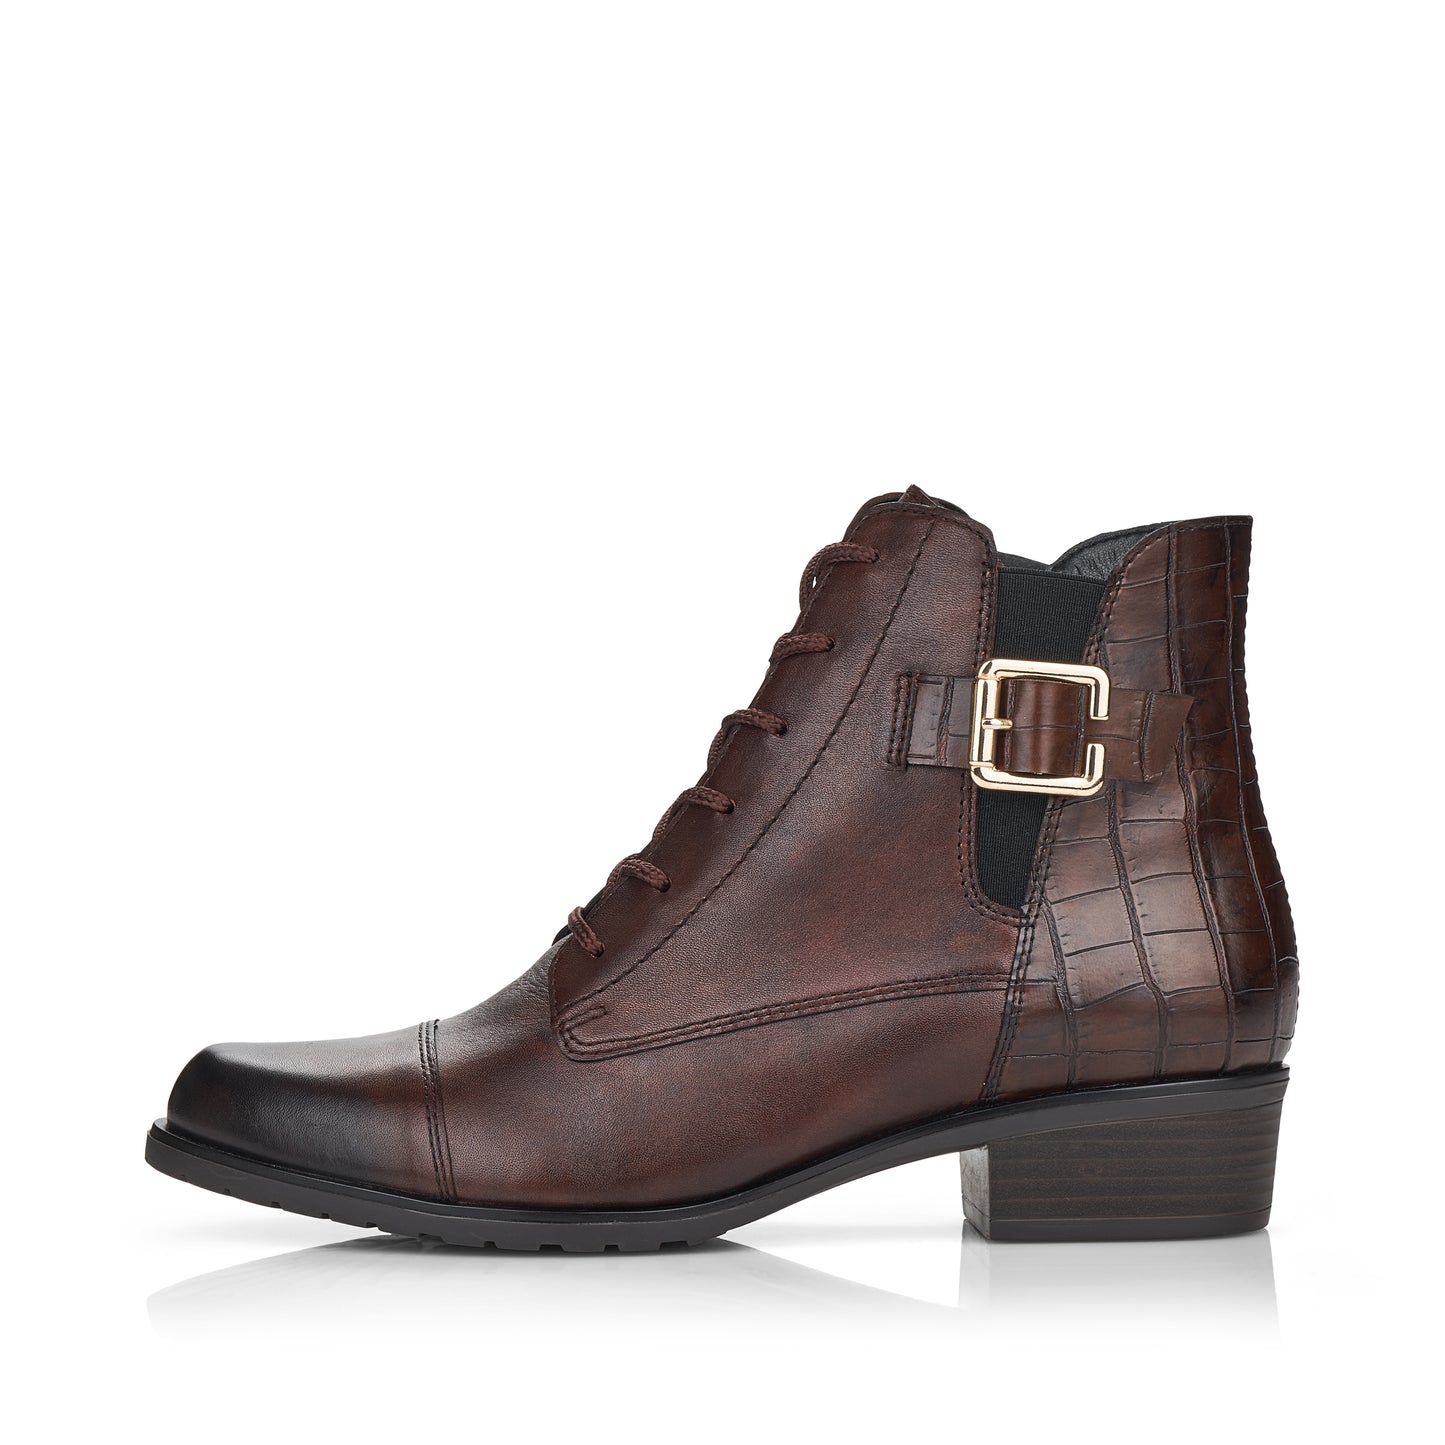 Remonte D6875-26 Brown Ankle Boots with Gold Buckle